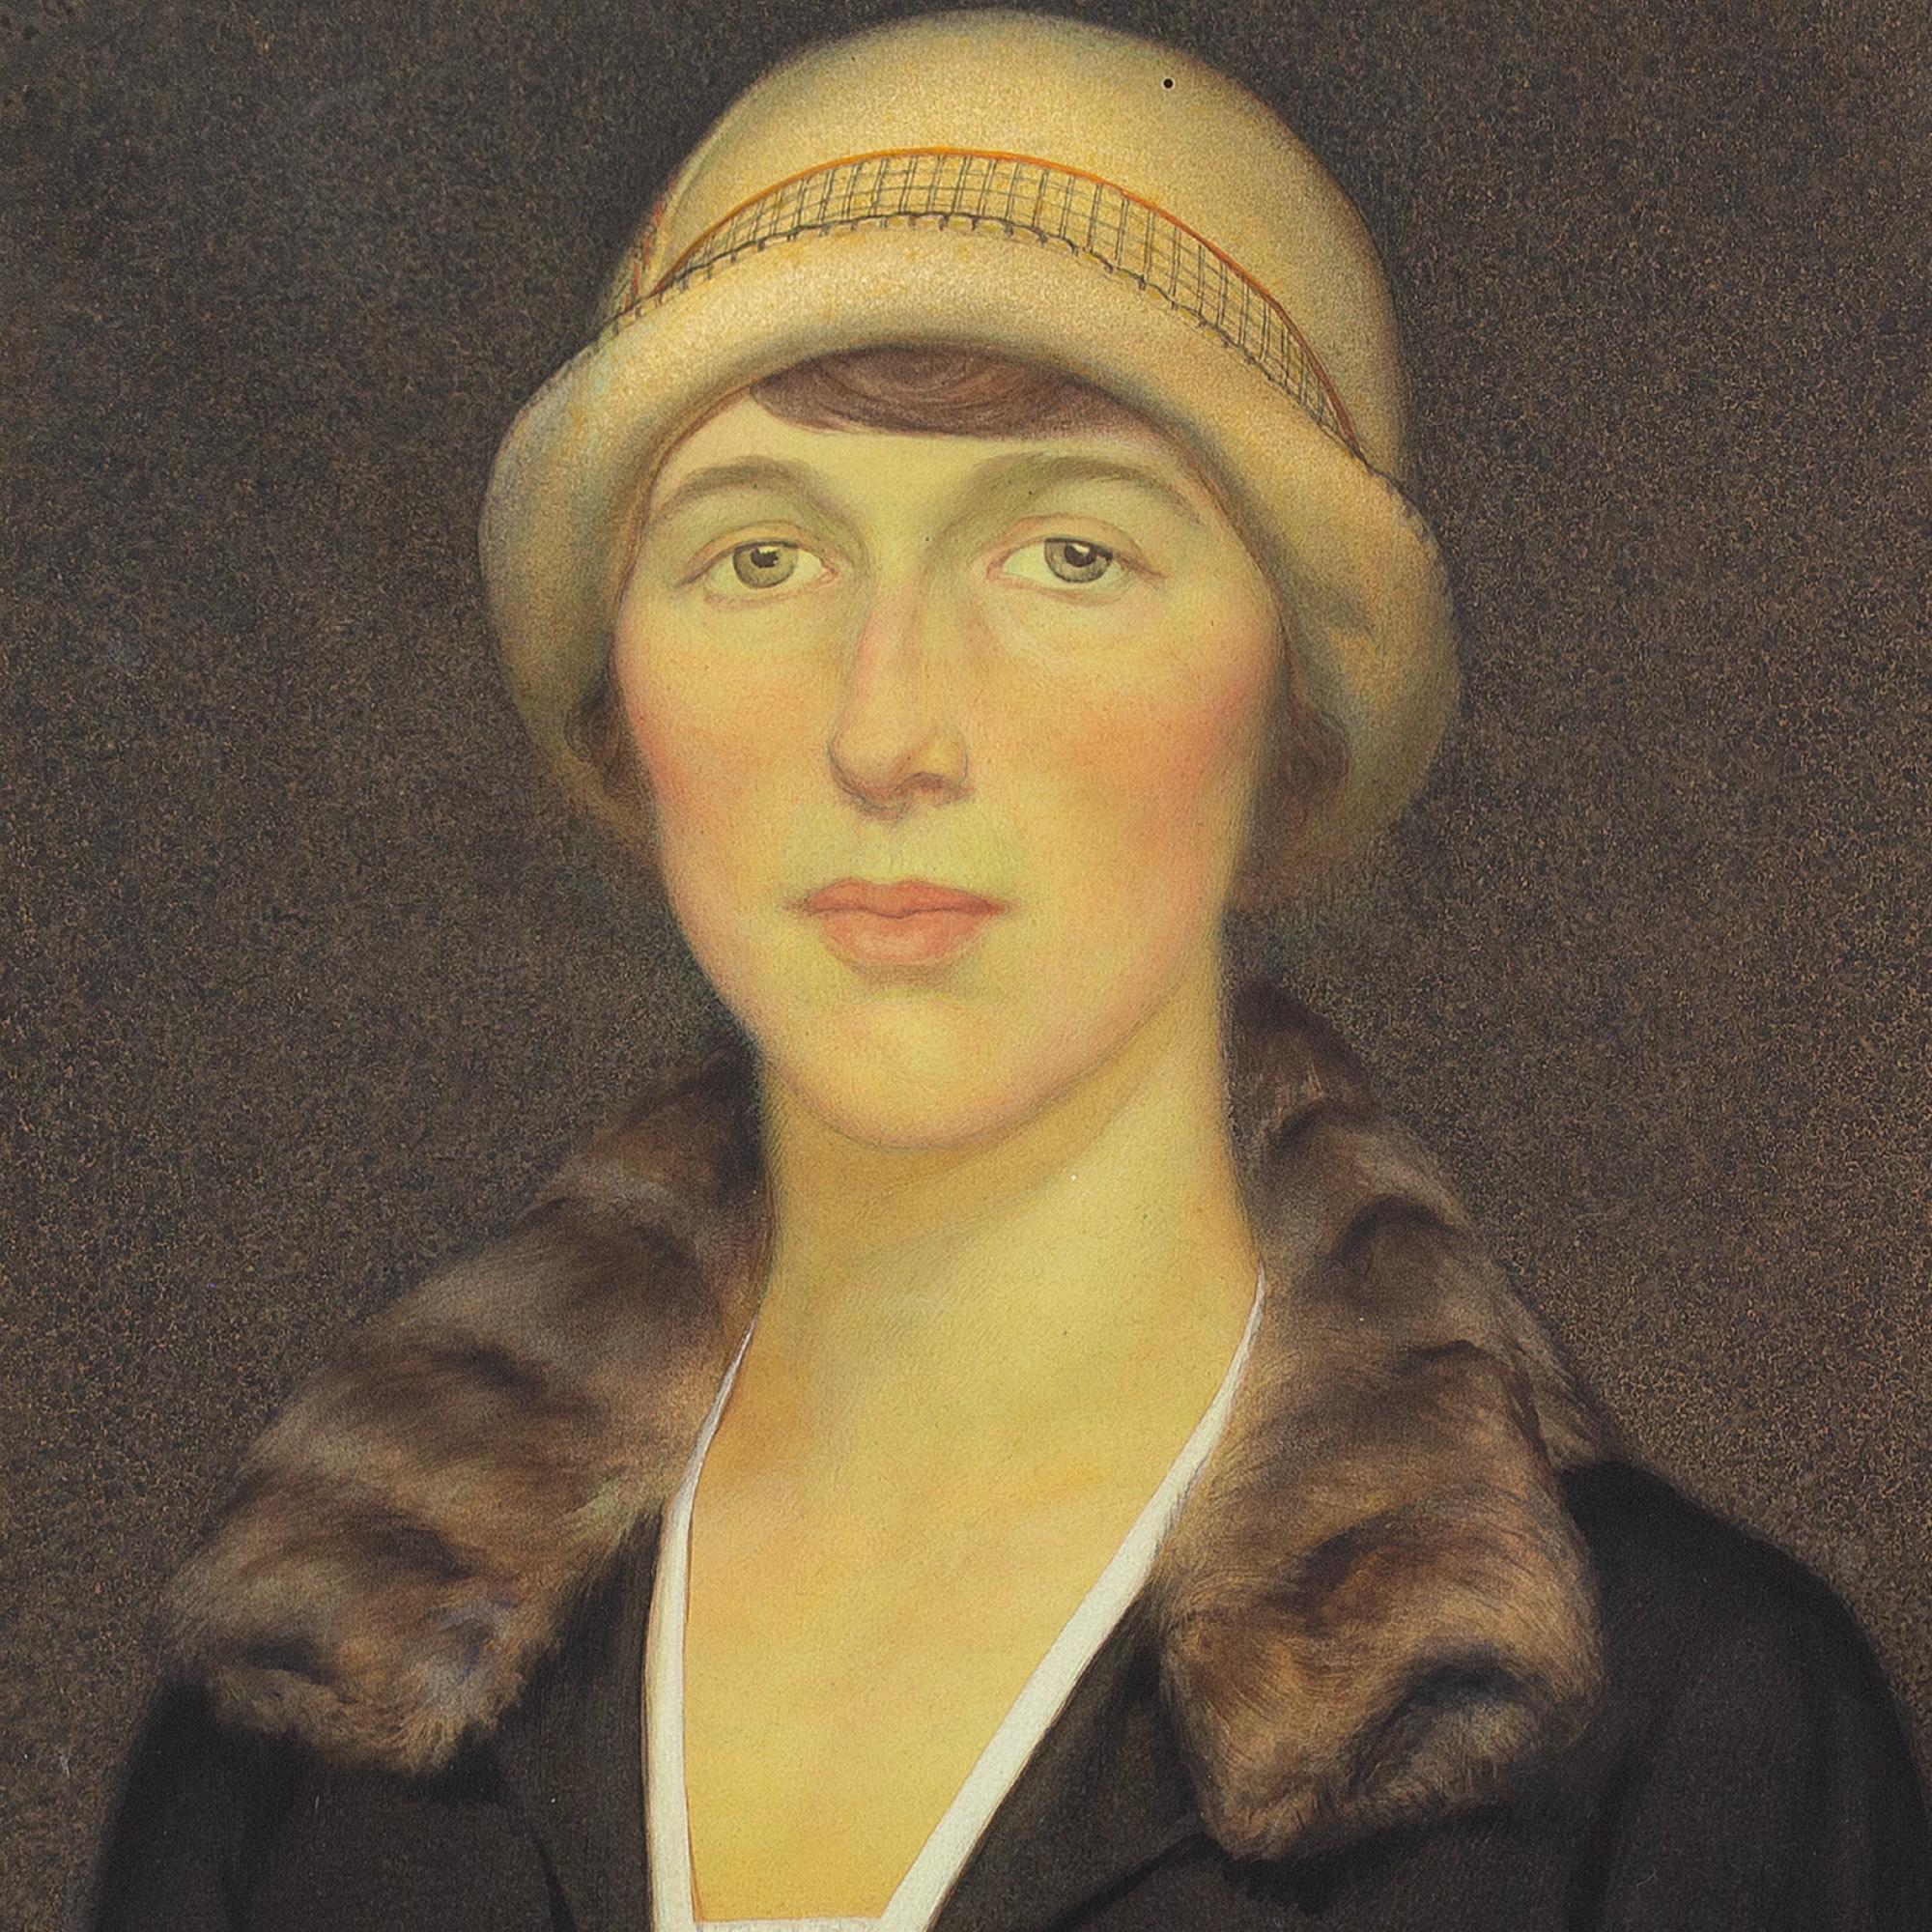 This stylish 1920s portrait by English artist Edward Ridley (1883-1946) depicts a woman wearing a hat and coat with a fur collar. It’s a fascinating piece produced during Ridley’s time as Headmaster of the Dress Department at the Central School of